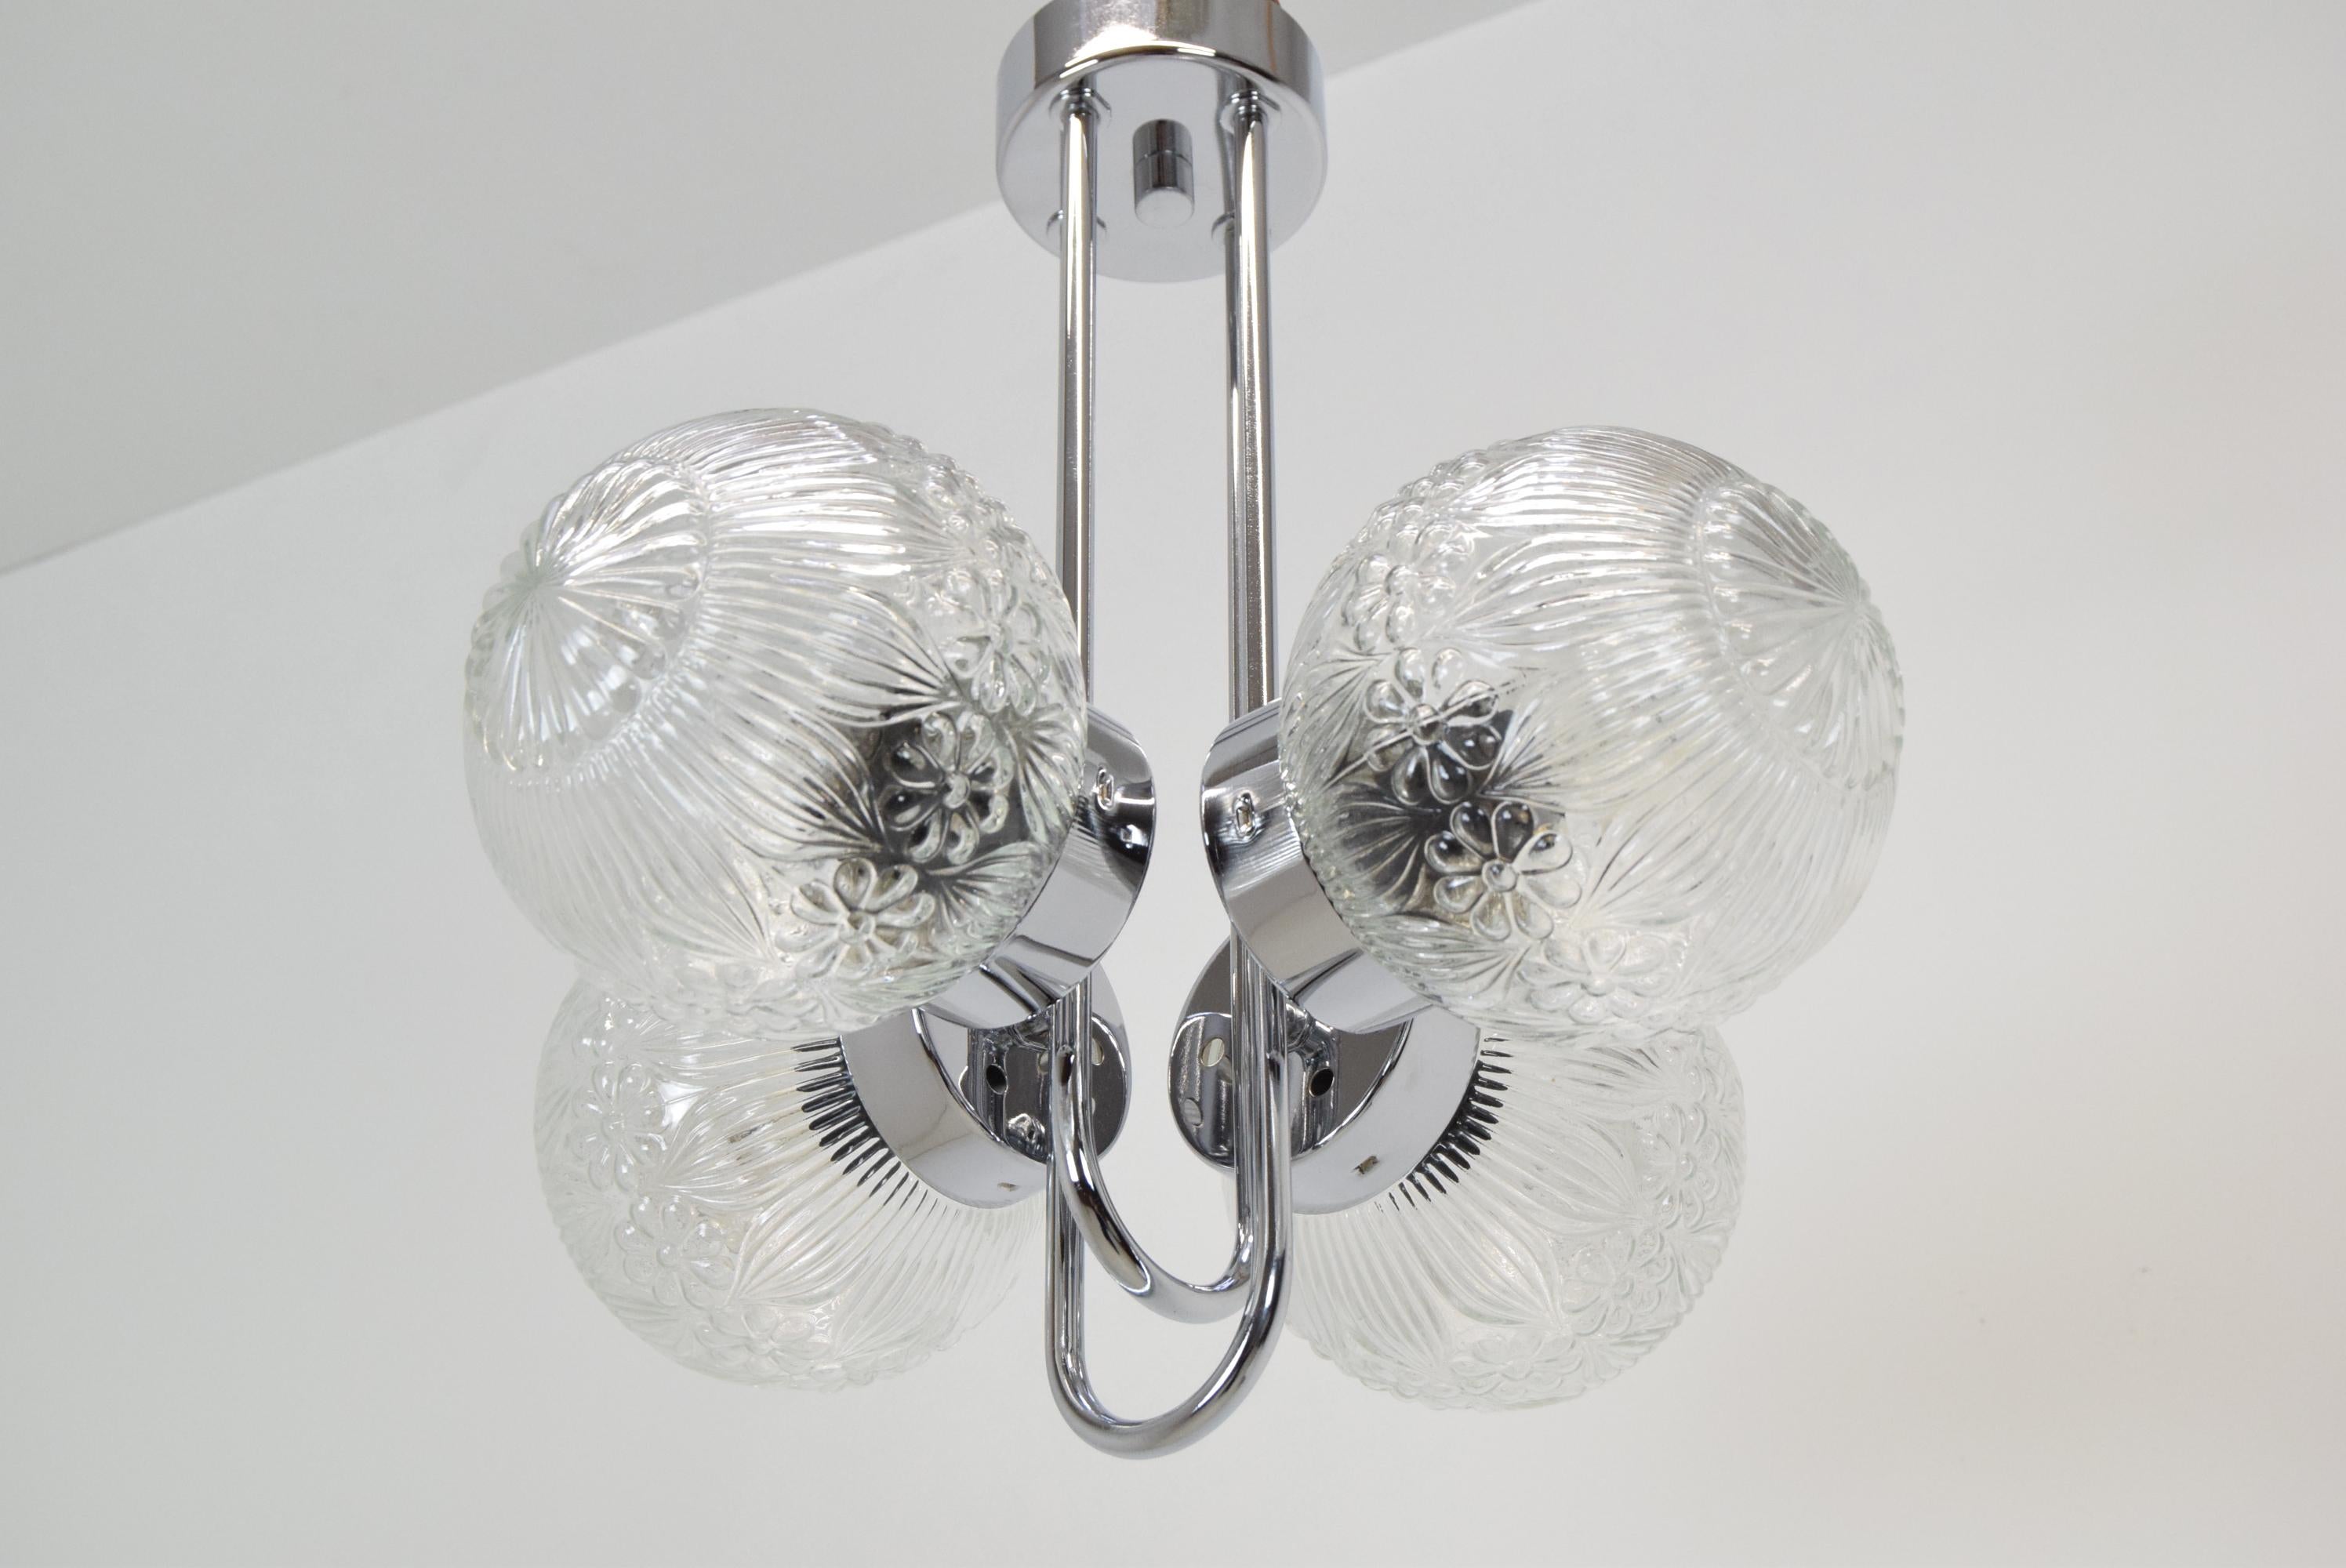 Czech Pair of Mid-Century Chrome Chandeliers by Instala Decin, 1970s For Sale